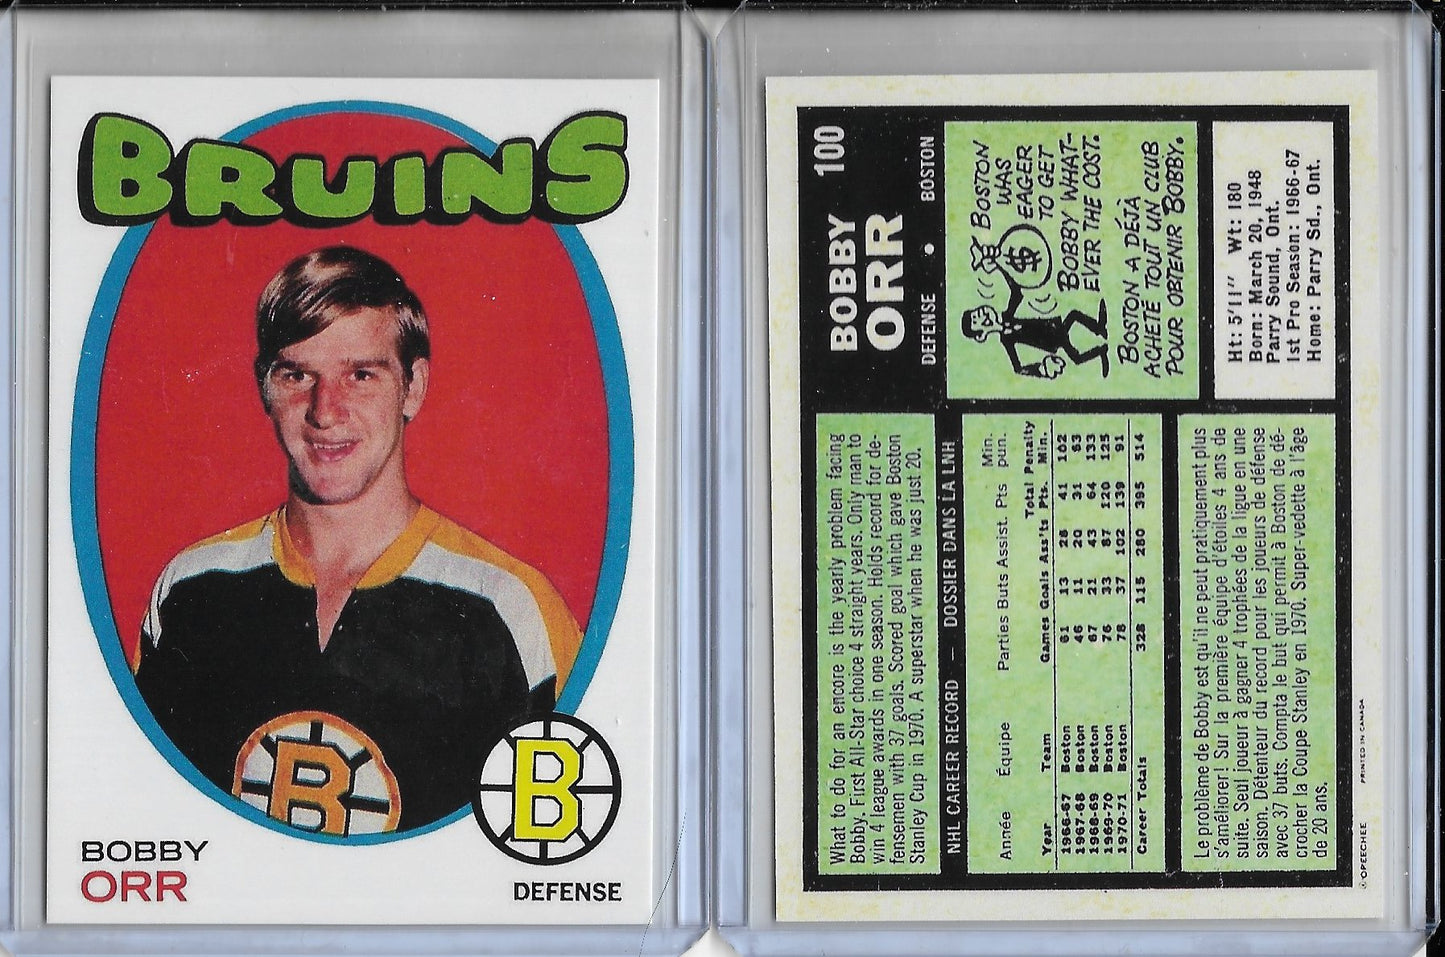 1971-72 O Pee Chee #100 BOBBY ORR BOSTON BRUINS RP CARD - NOT HIS ROOKIE